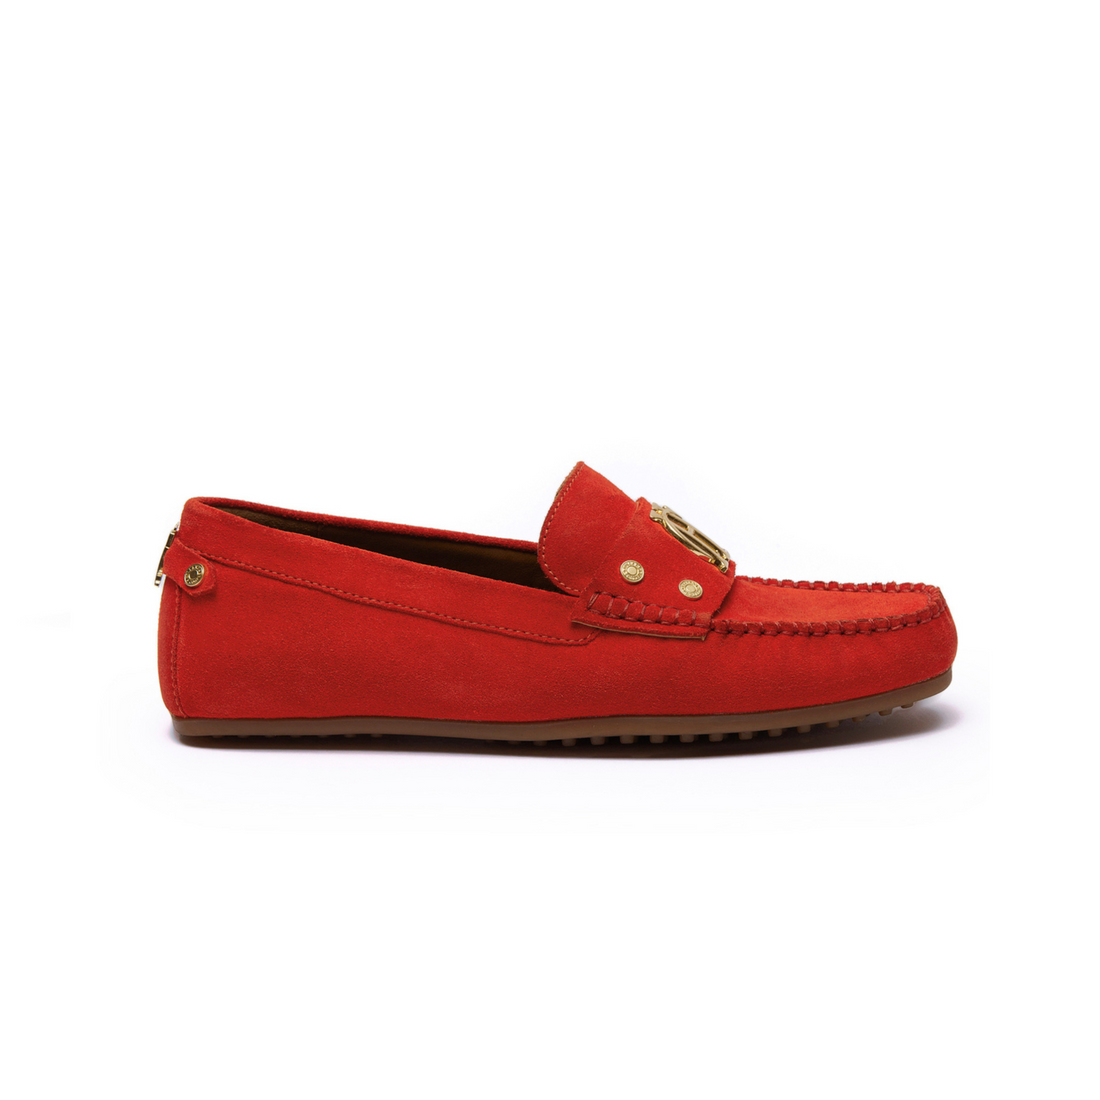 The Driving Loafer Neroli Suede